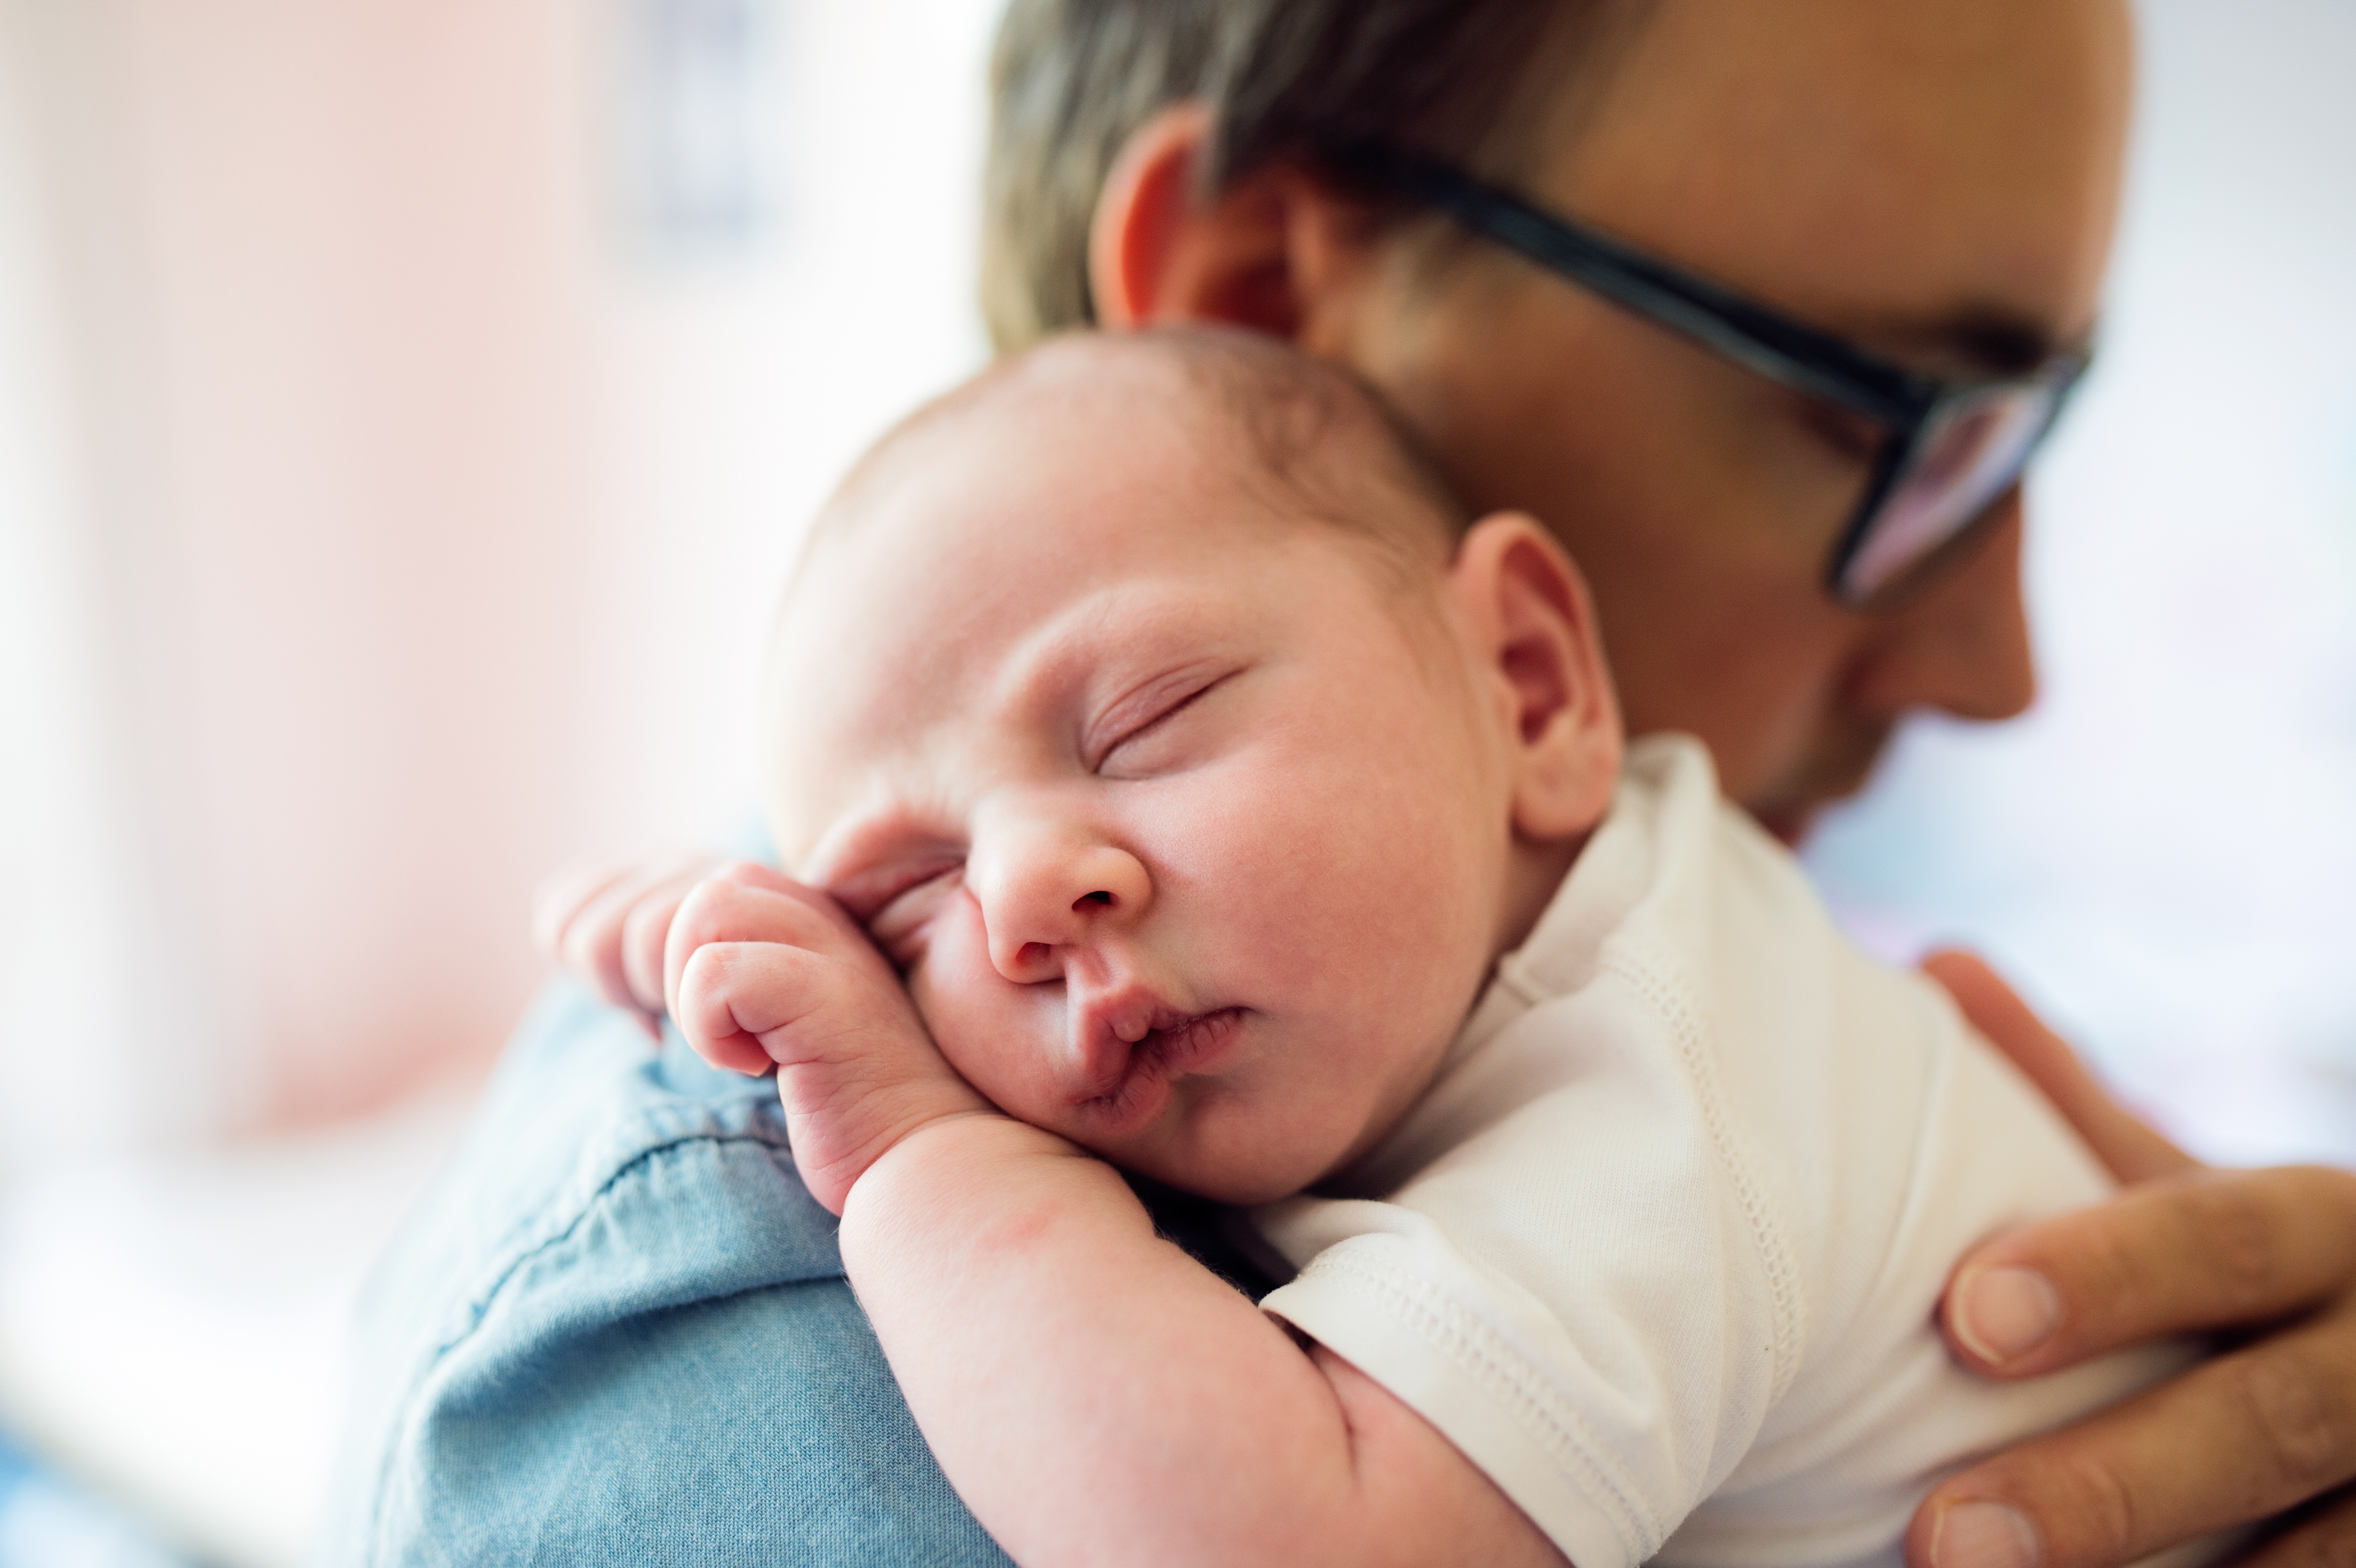 Parental leave—what’s the industry standard?